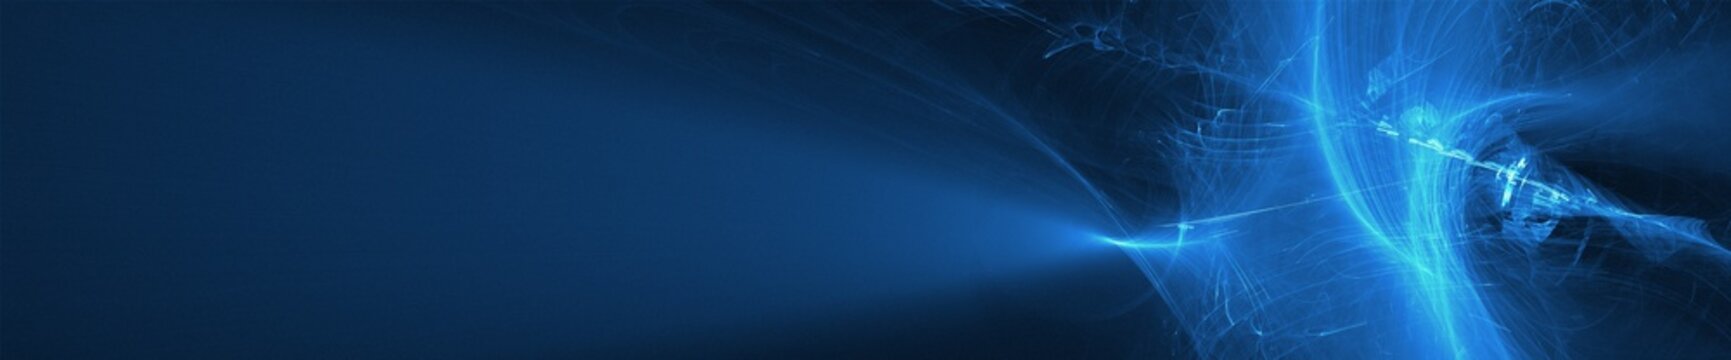 blue glow wave. lighting effect abstract background